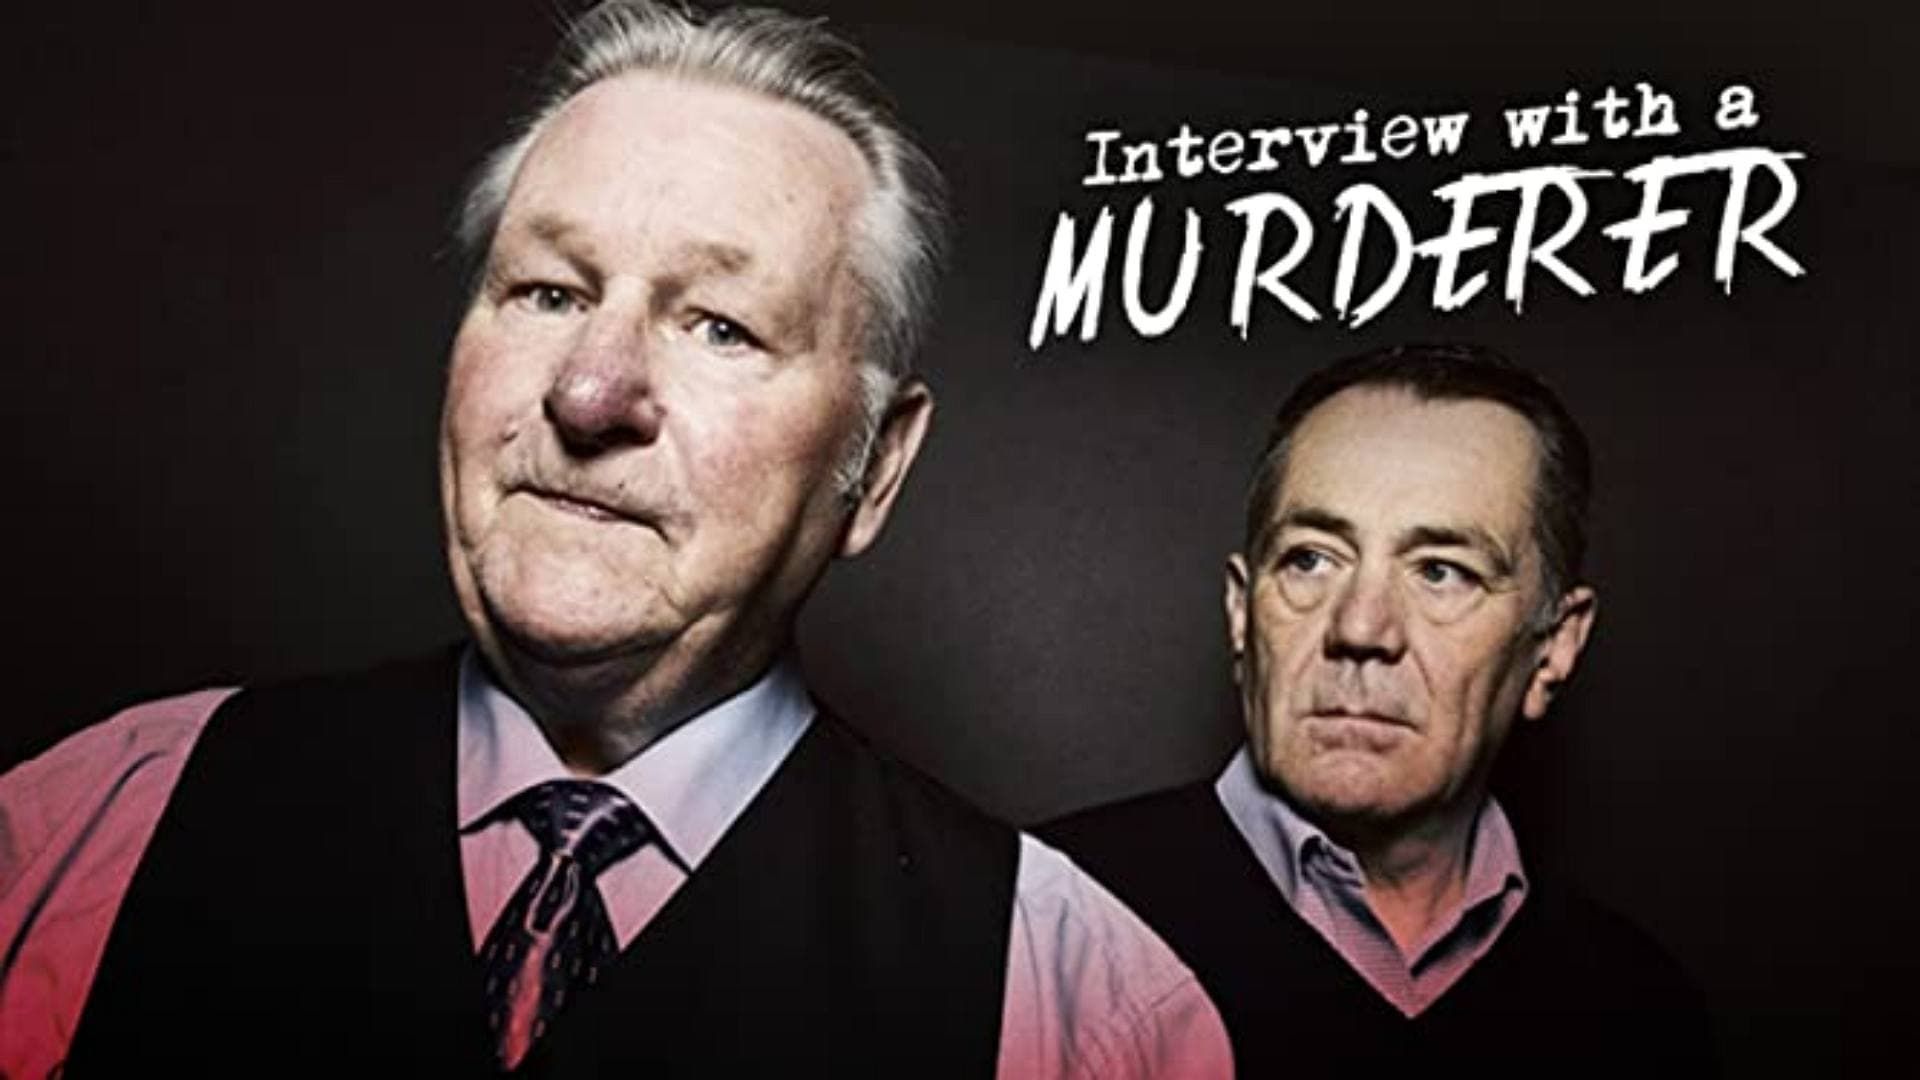 Interview with a Murderer background